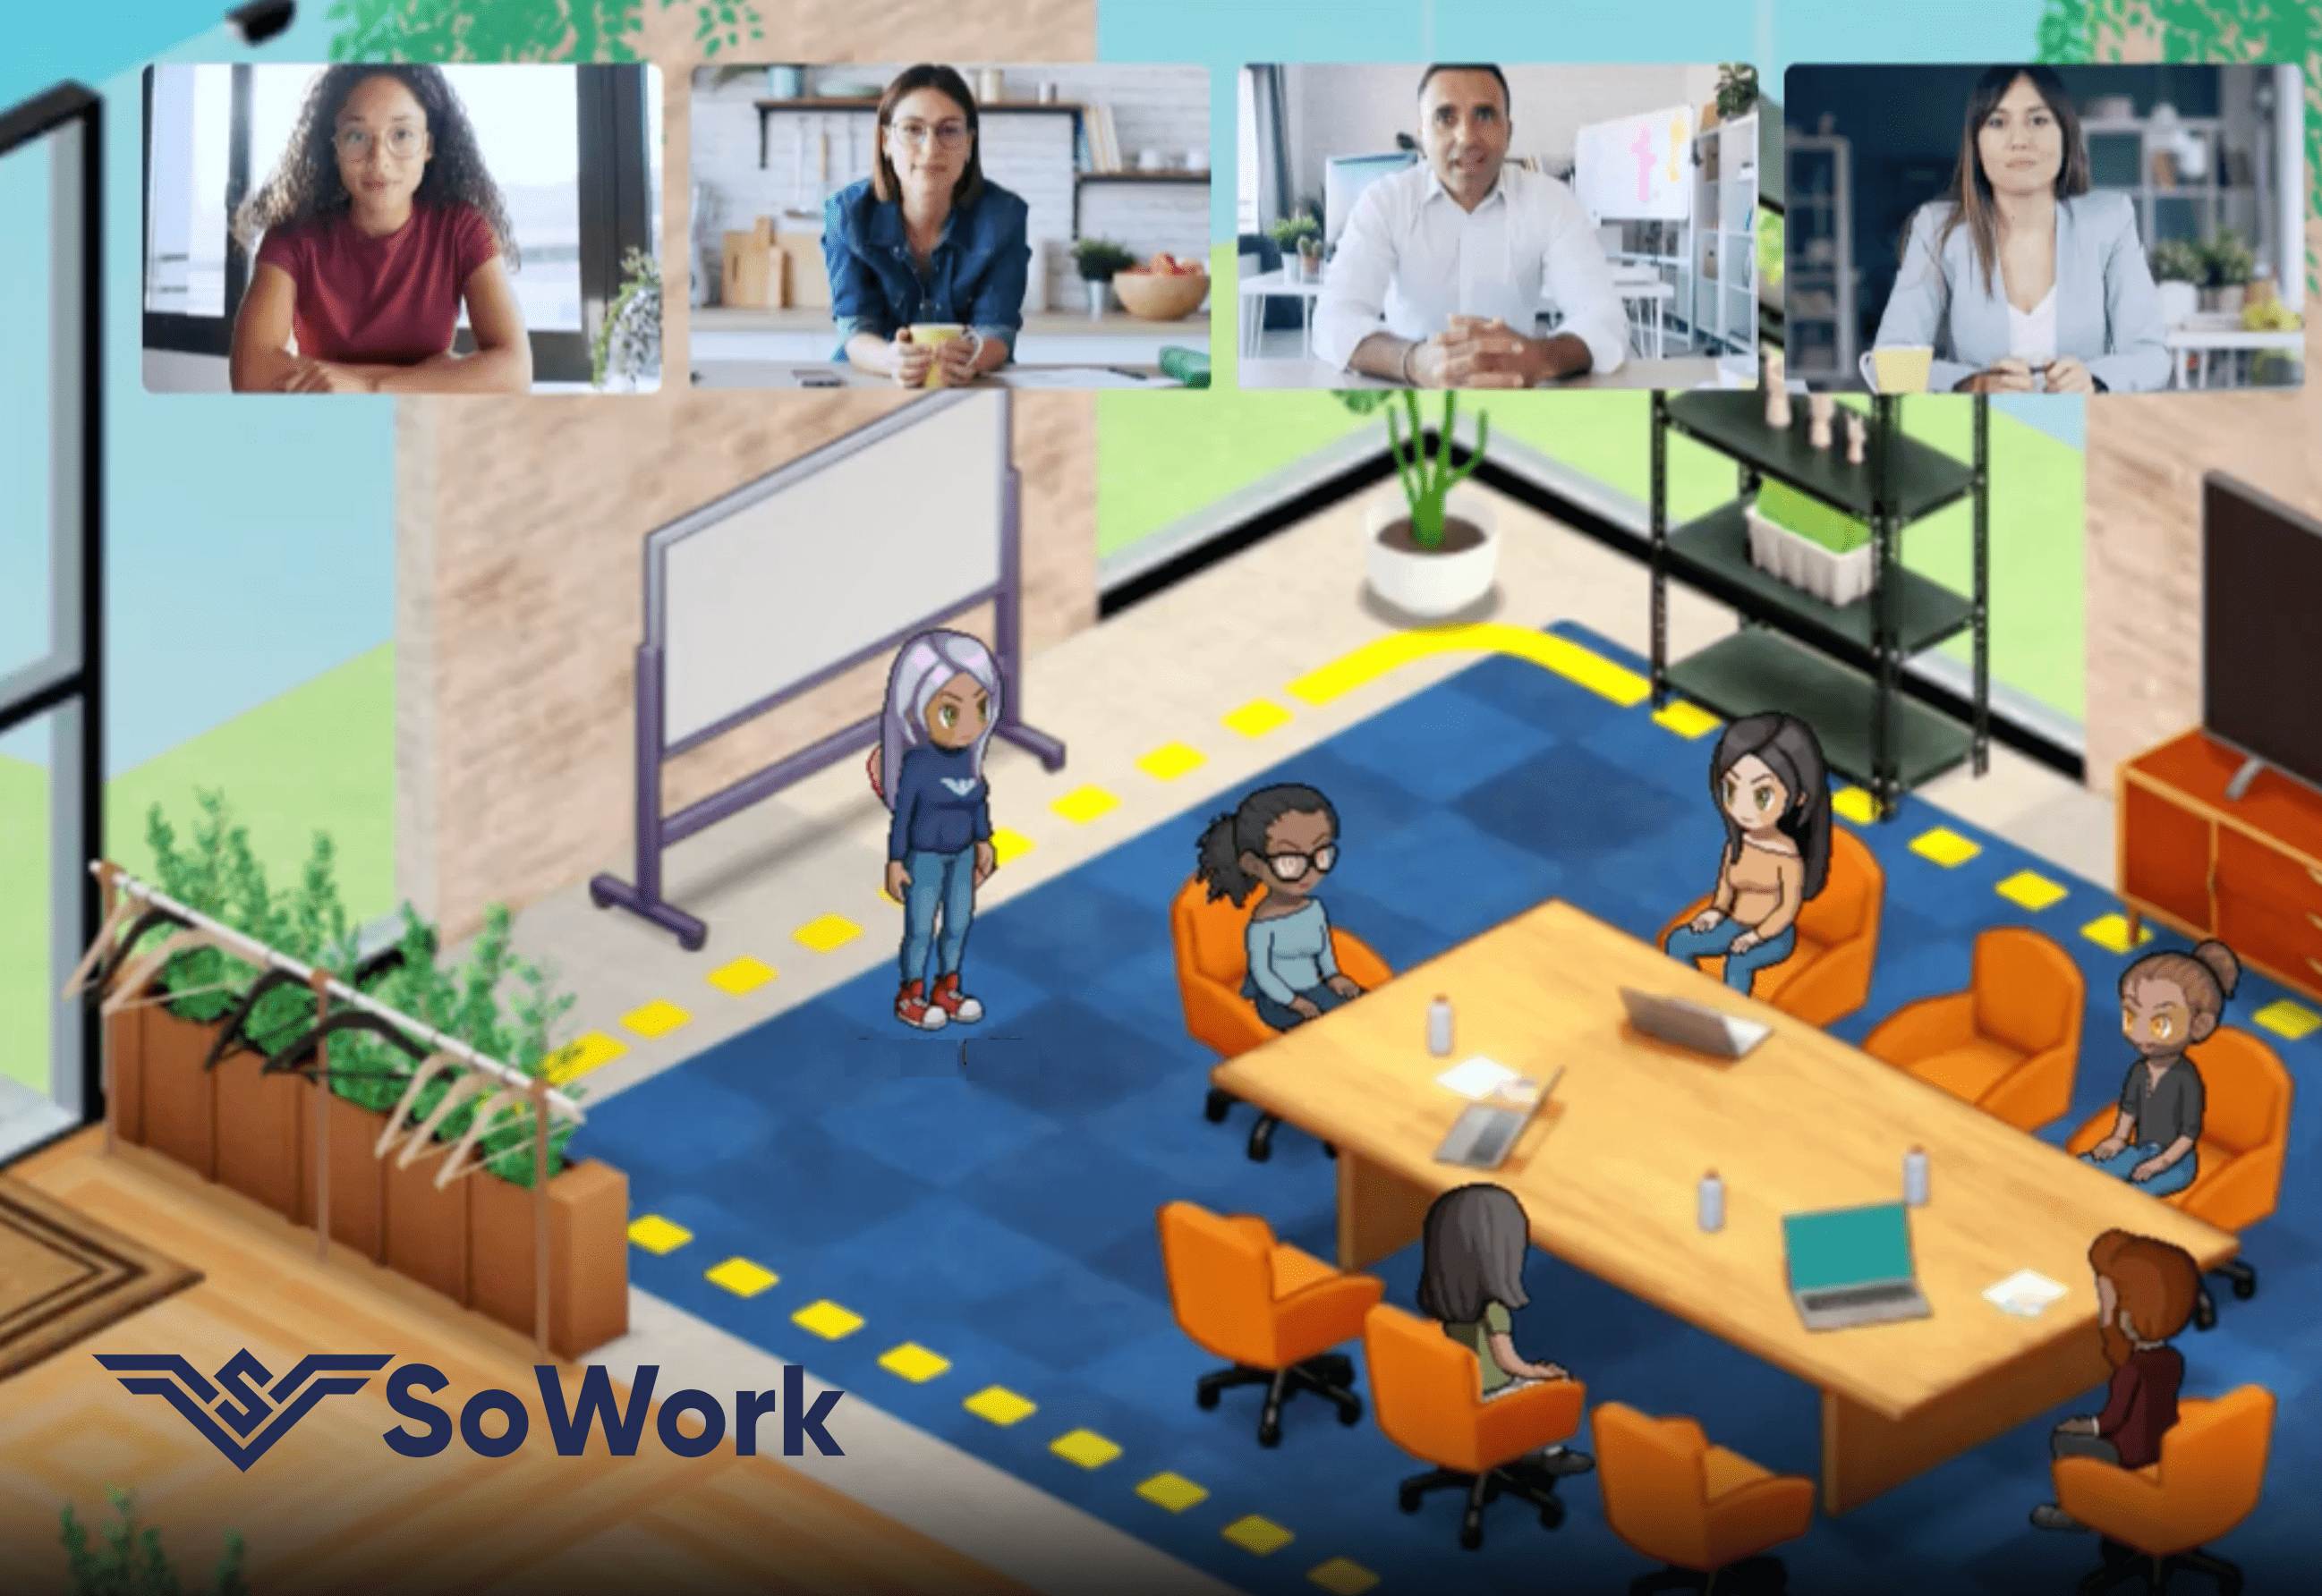 SoWork Featured Image